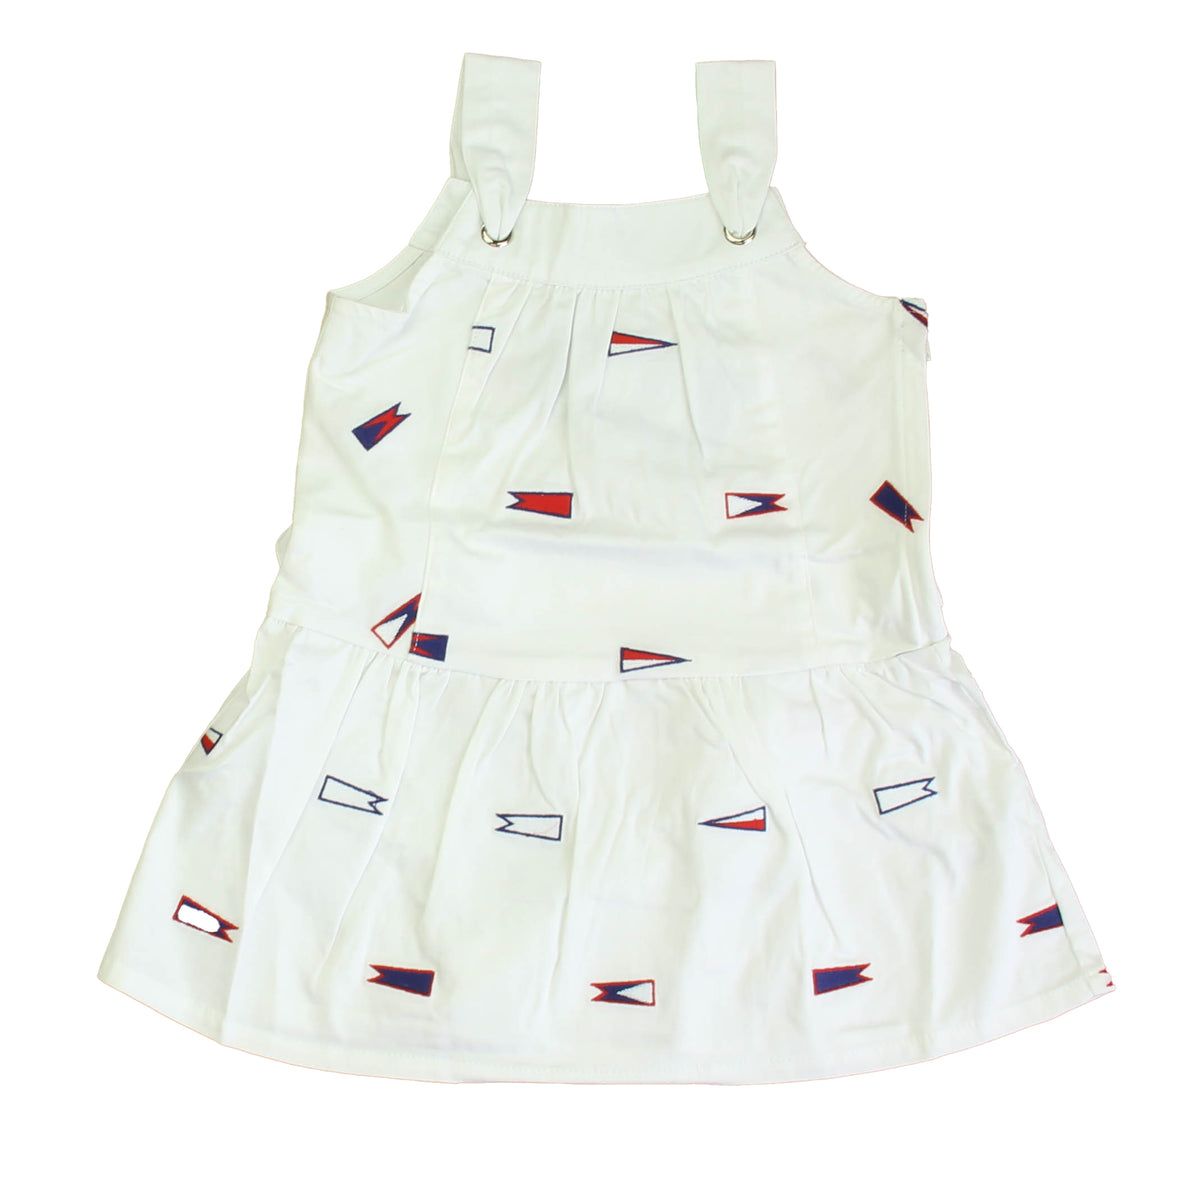 New with Tags: Bright White with Burgees Dress size: 2-5T -- FINAL SALE